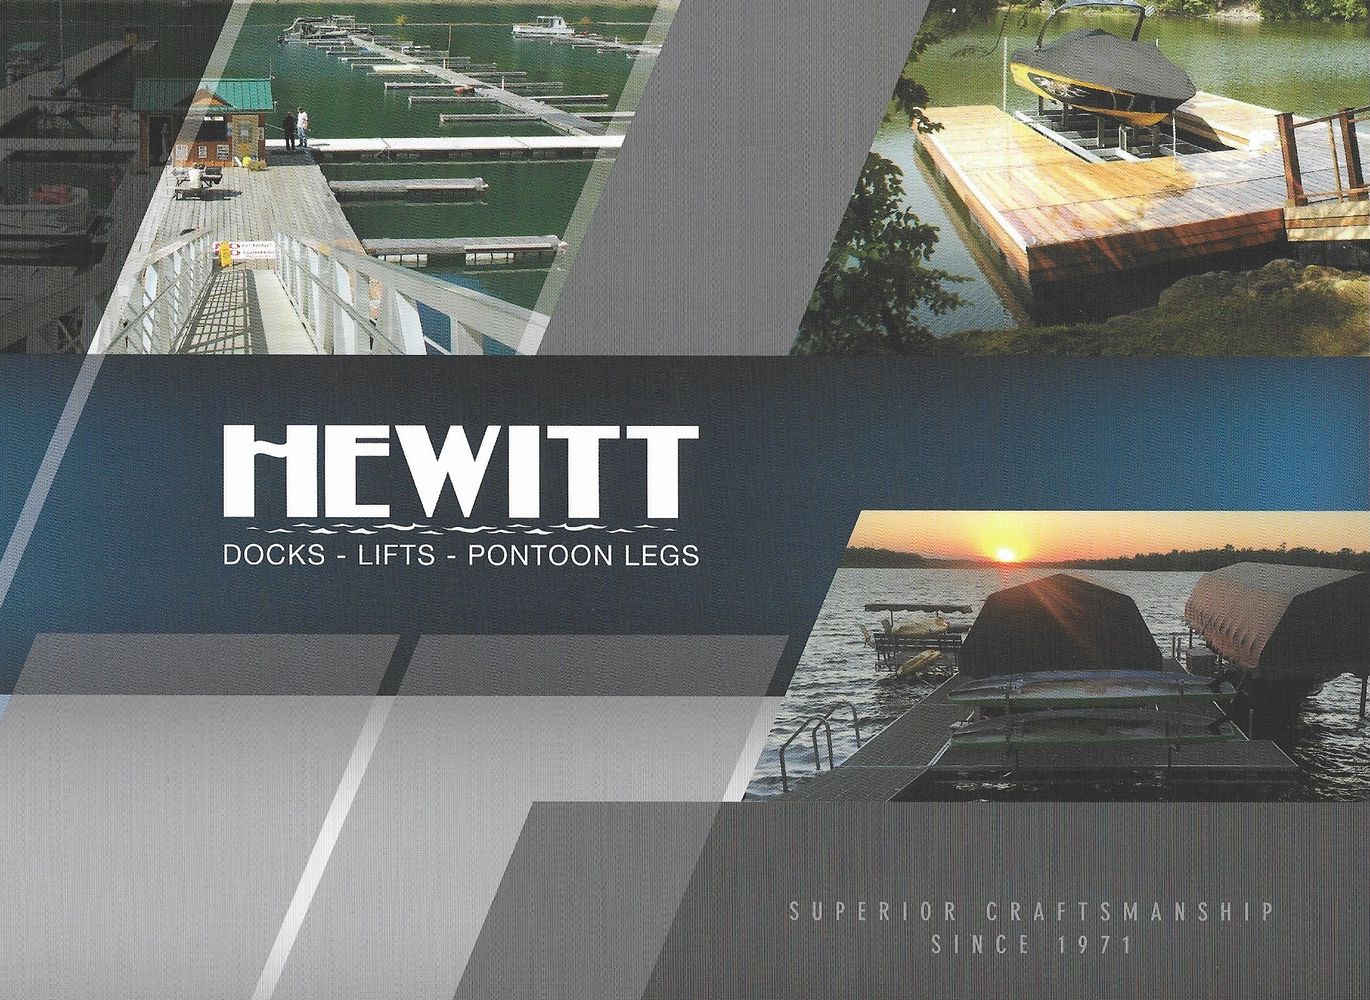 Lakeside Docks NY is an Authorized Hewitt Dock Dealer, makers of docks, lifts and pontoon legs.